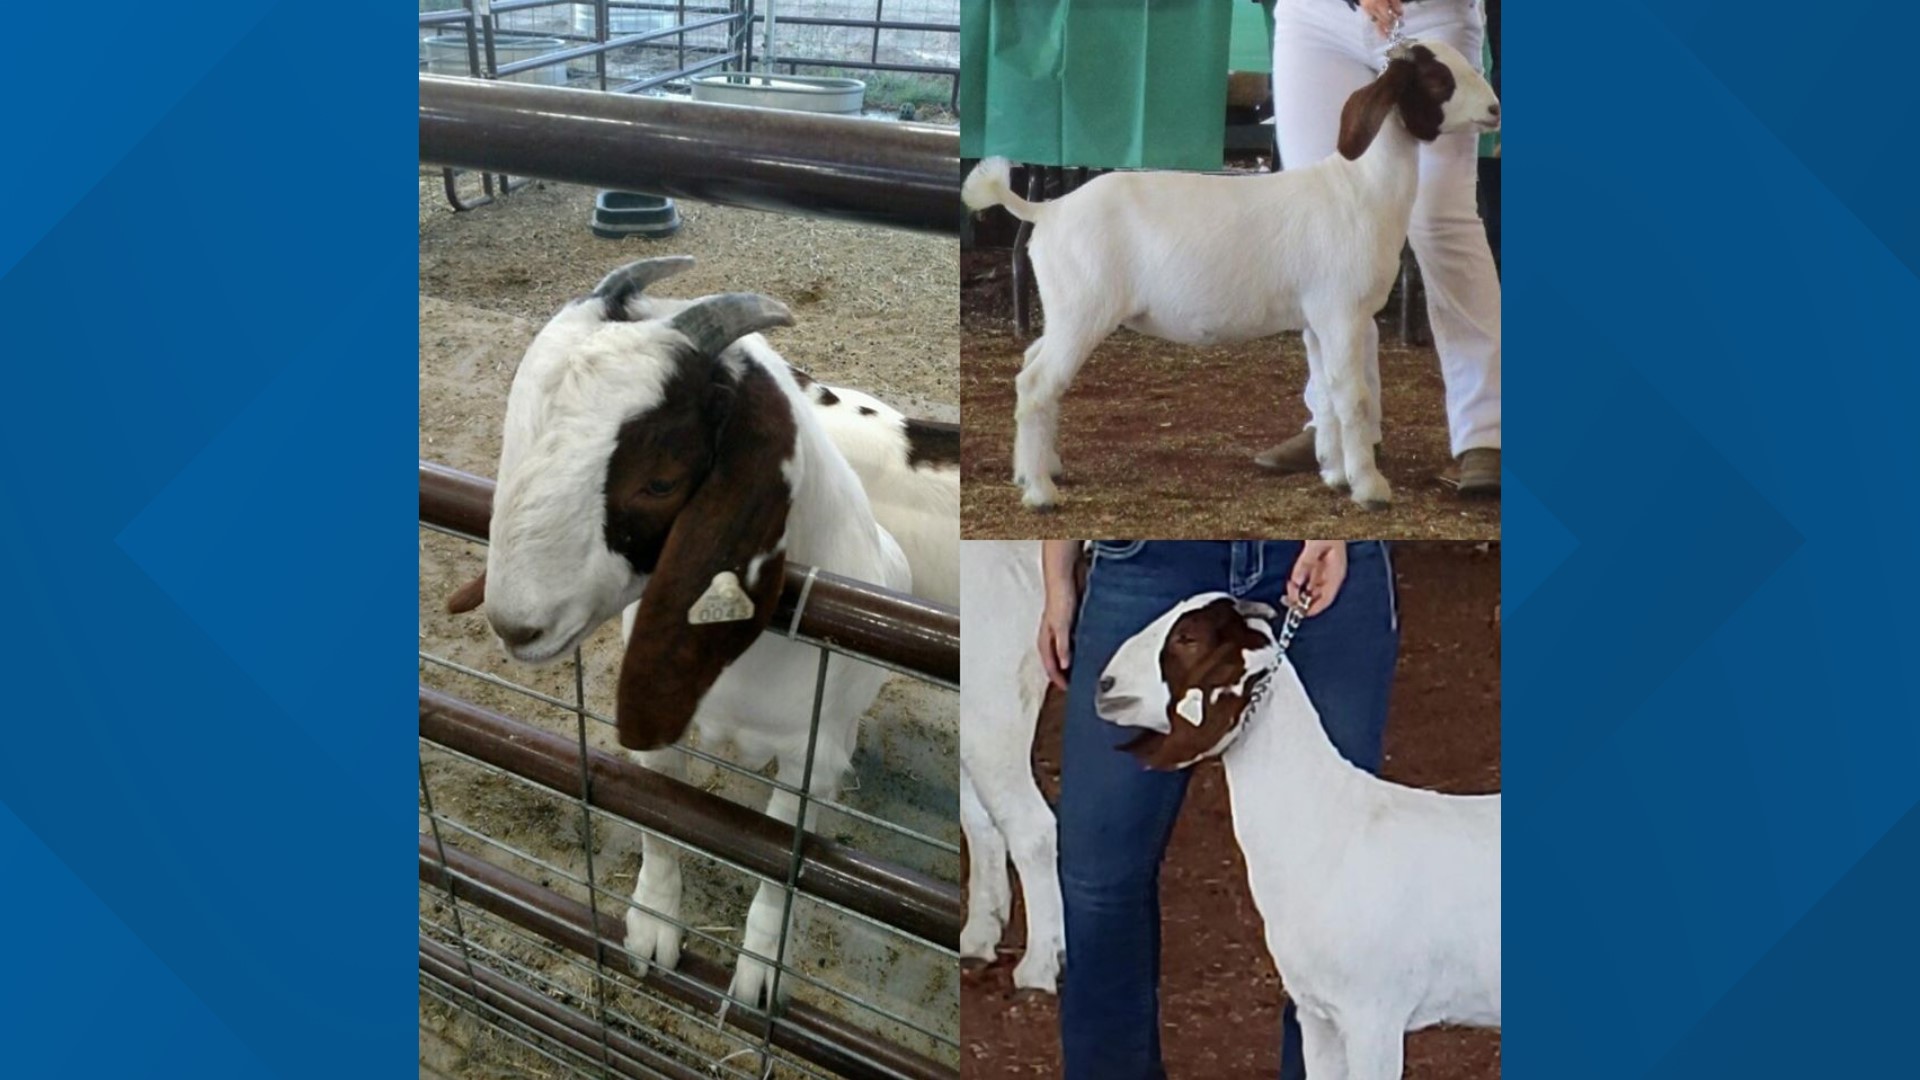 The goat, Bella, is valued at $500, but school officials say the emotional loss far exceeds the monetary value.